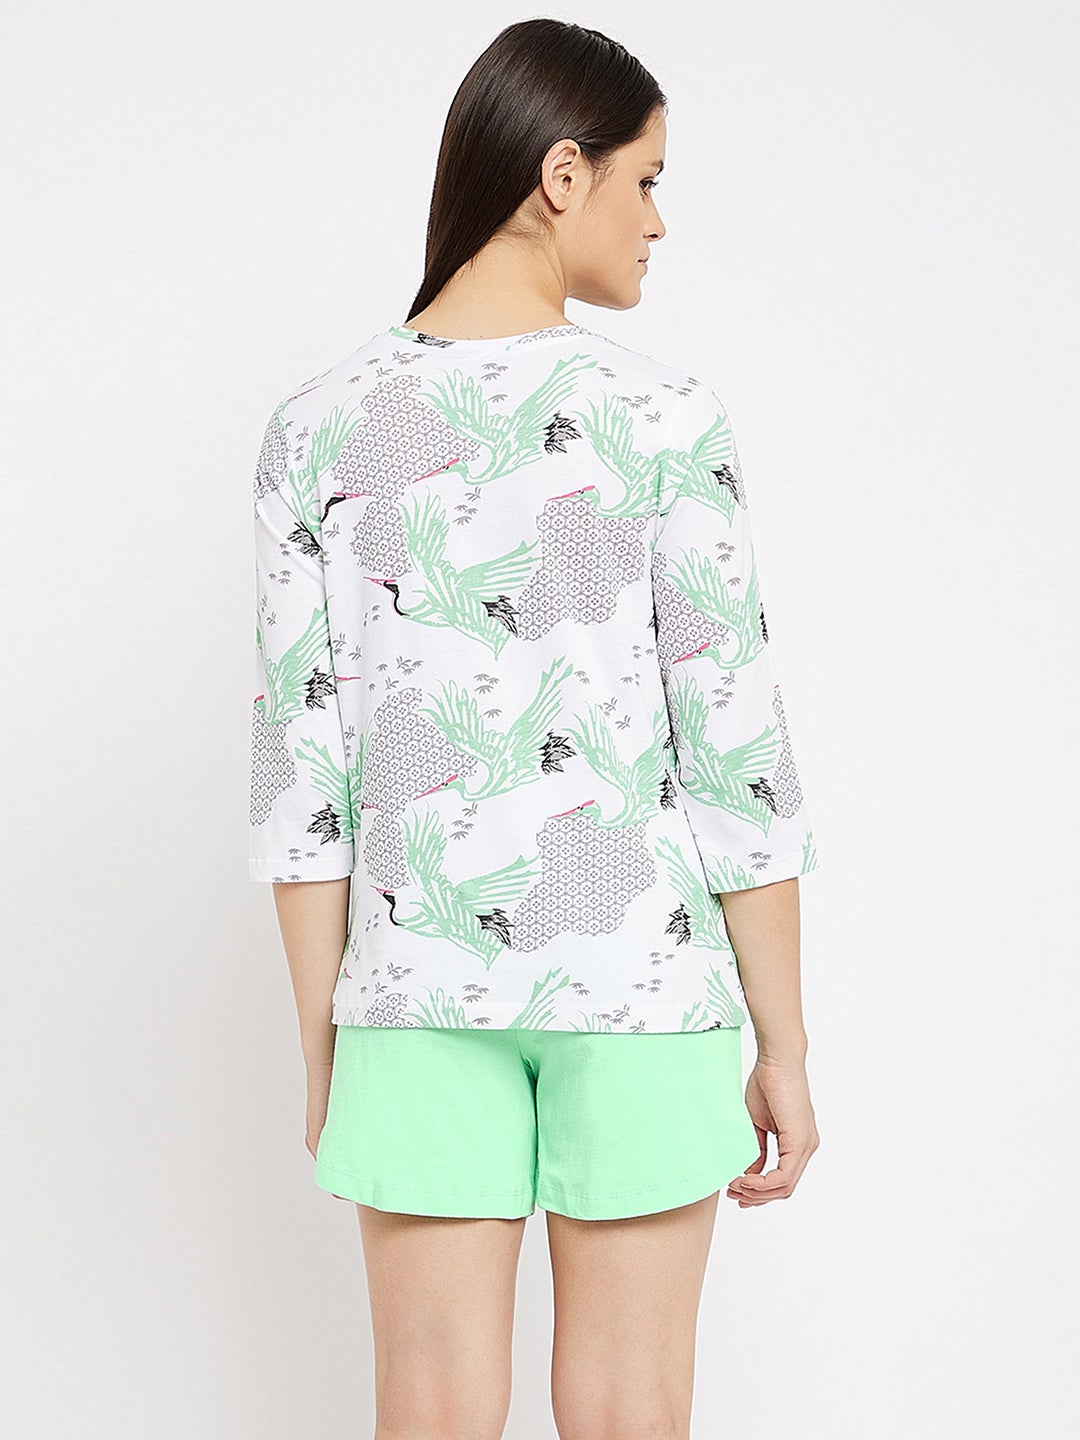 Mint Green Print Top In White & Solid Shorts